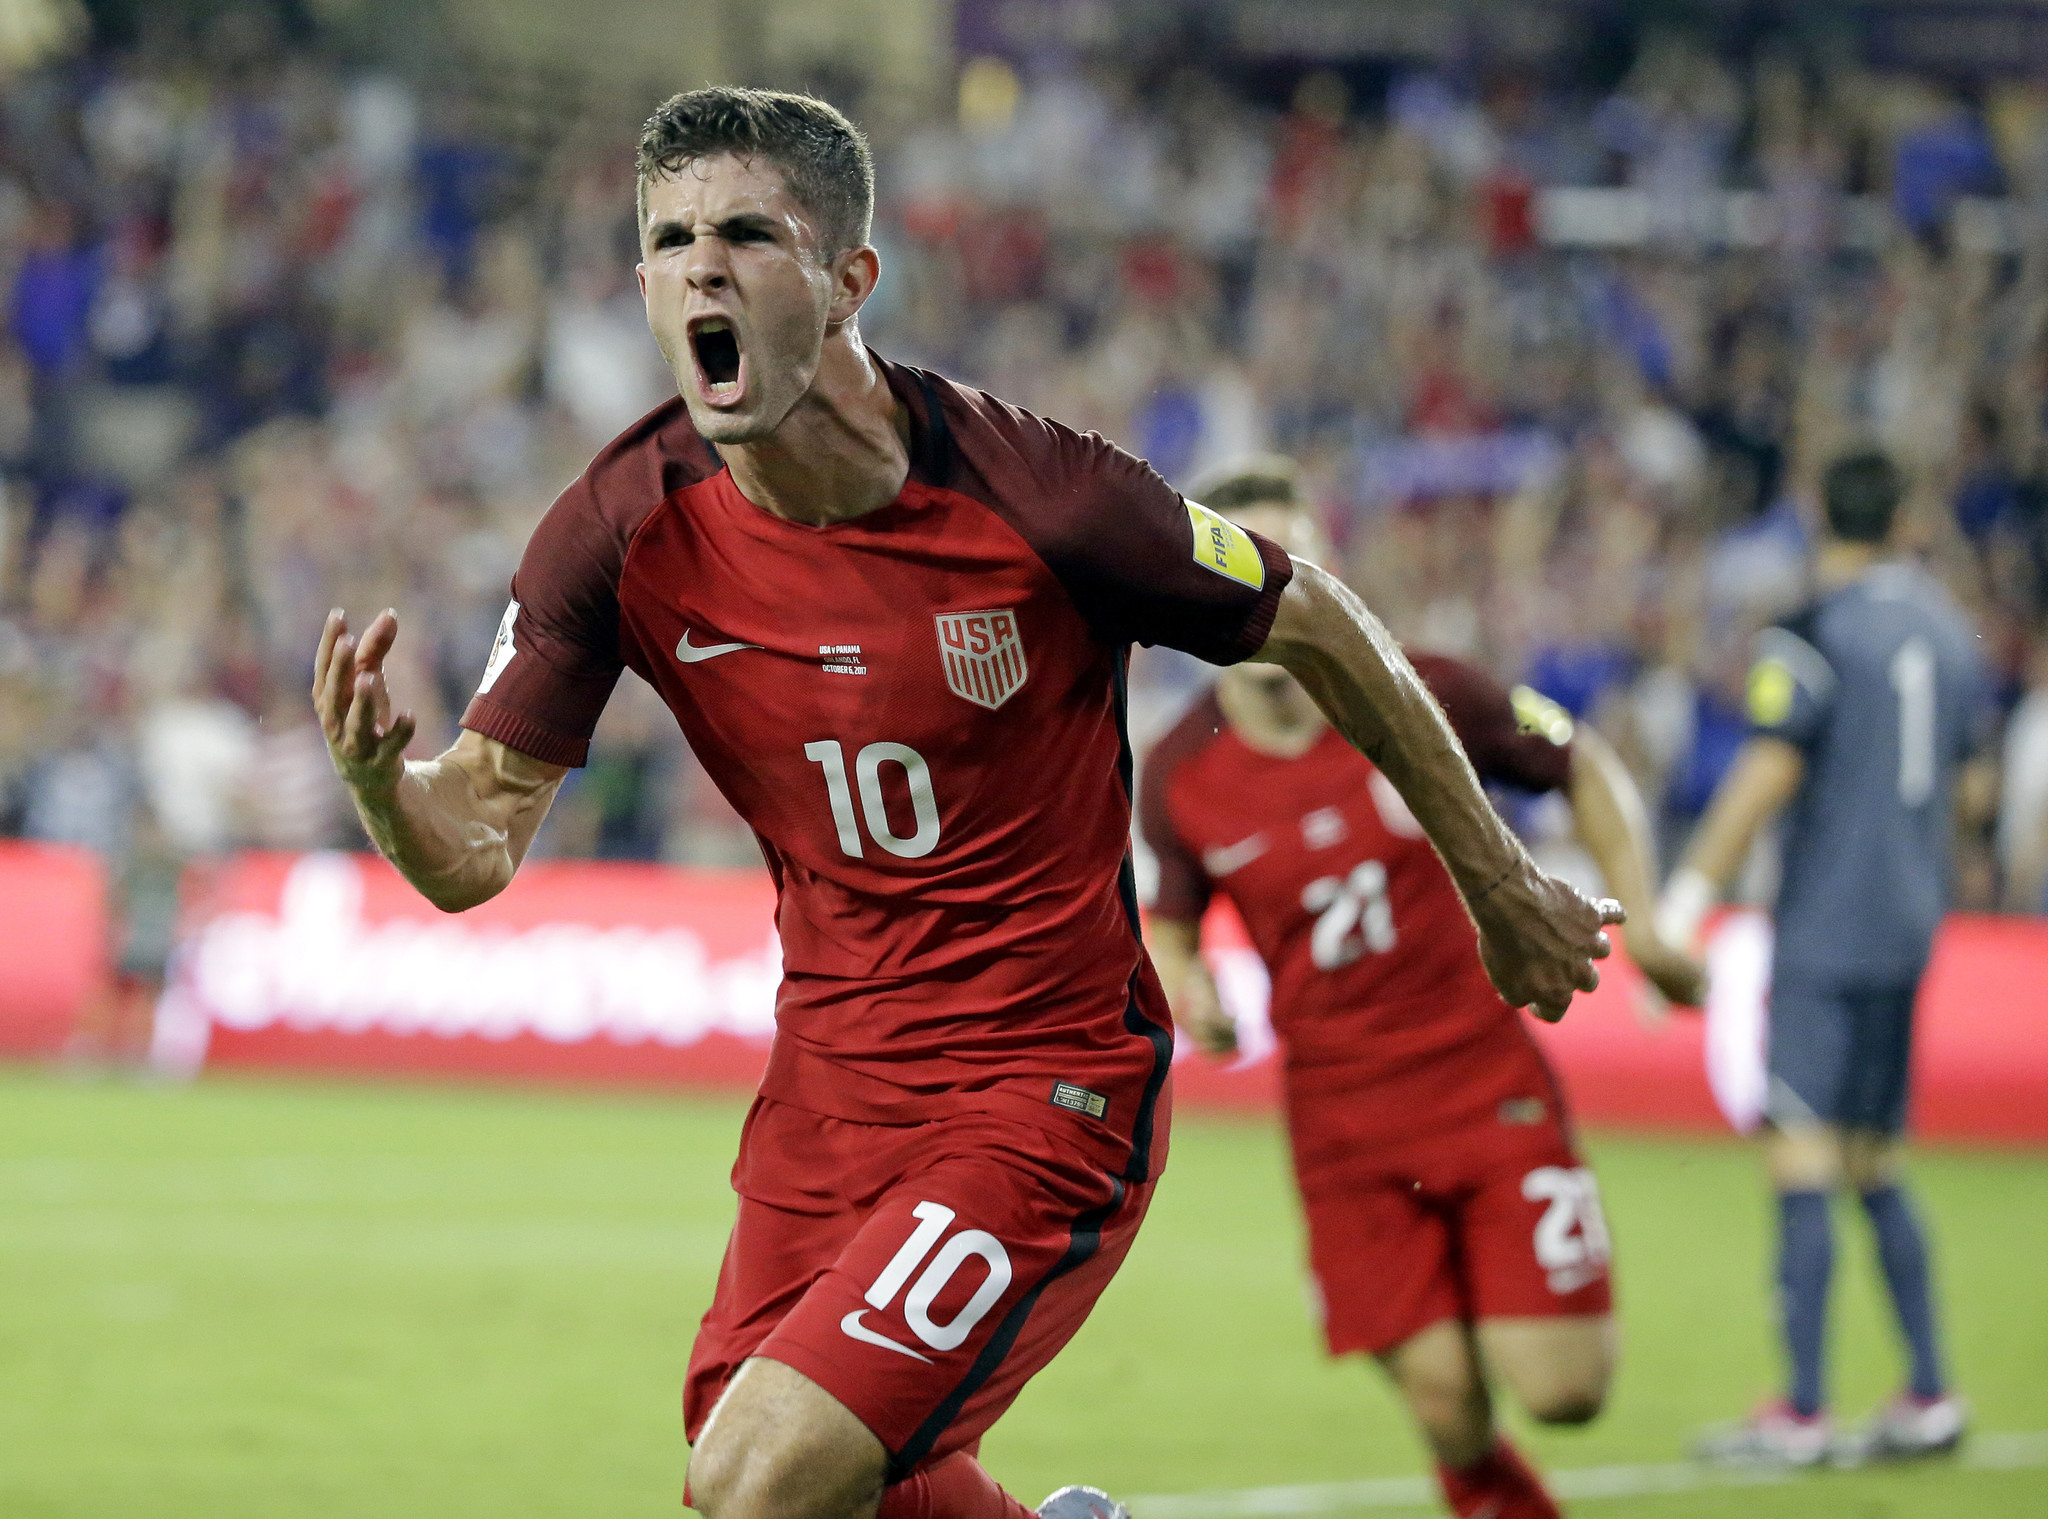 Christian Pulisic leads U.S. to crucial 4-0 win over Panama in World